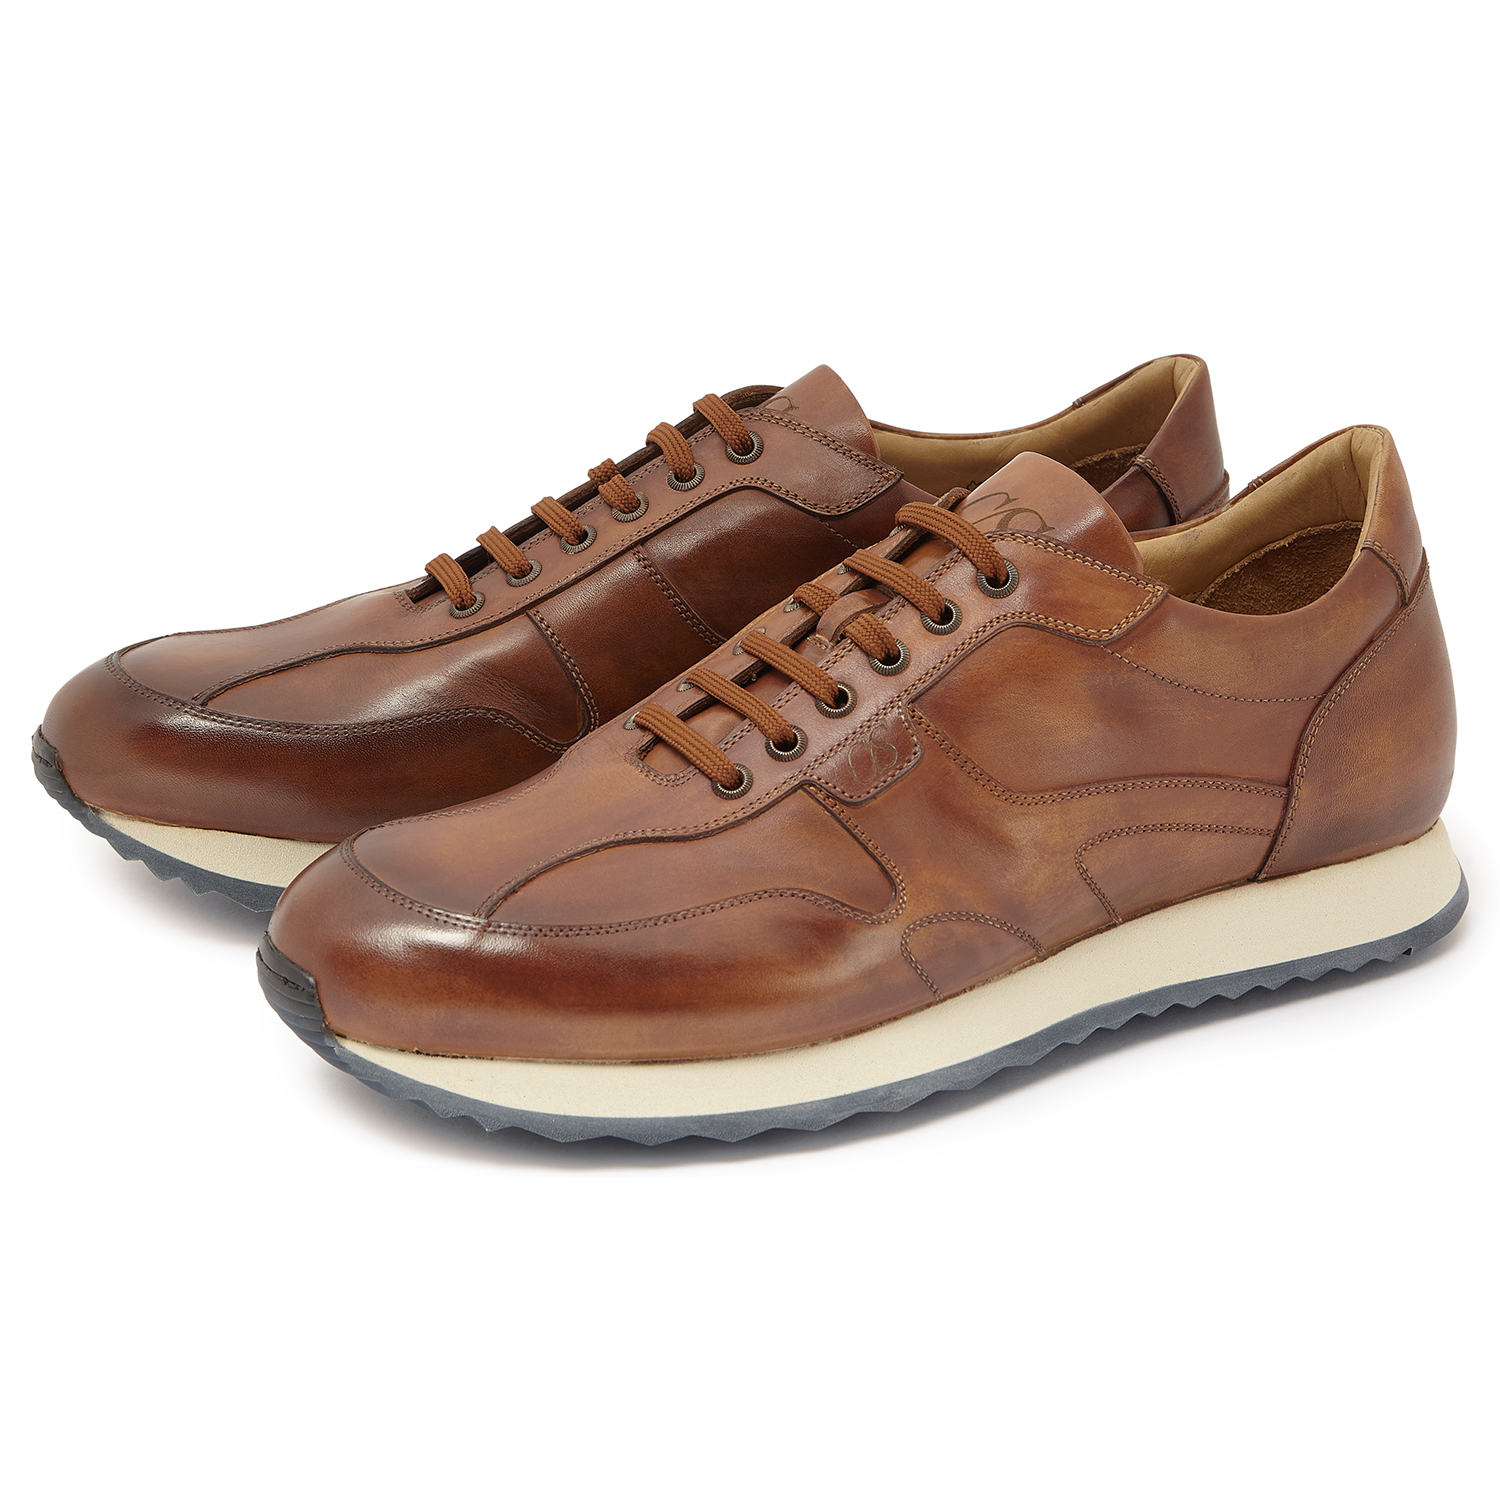 Loake Shoes, Loake, Grenson,Grenson Shoes,Trickers Shoes, Alfred ...